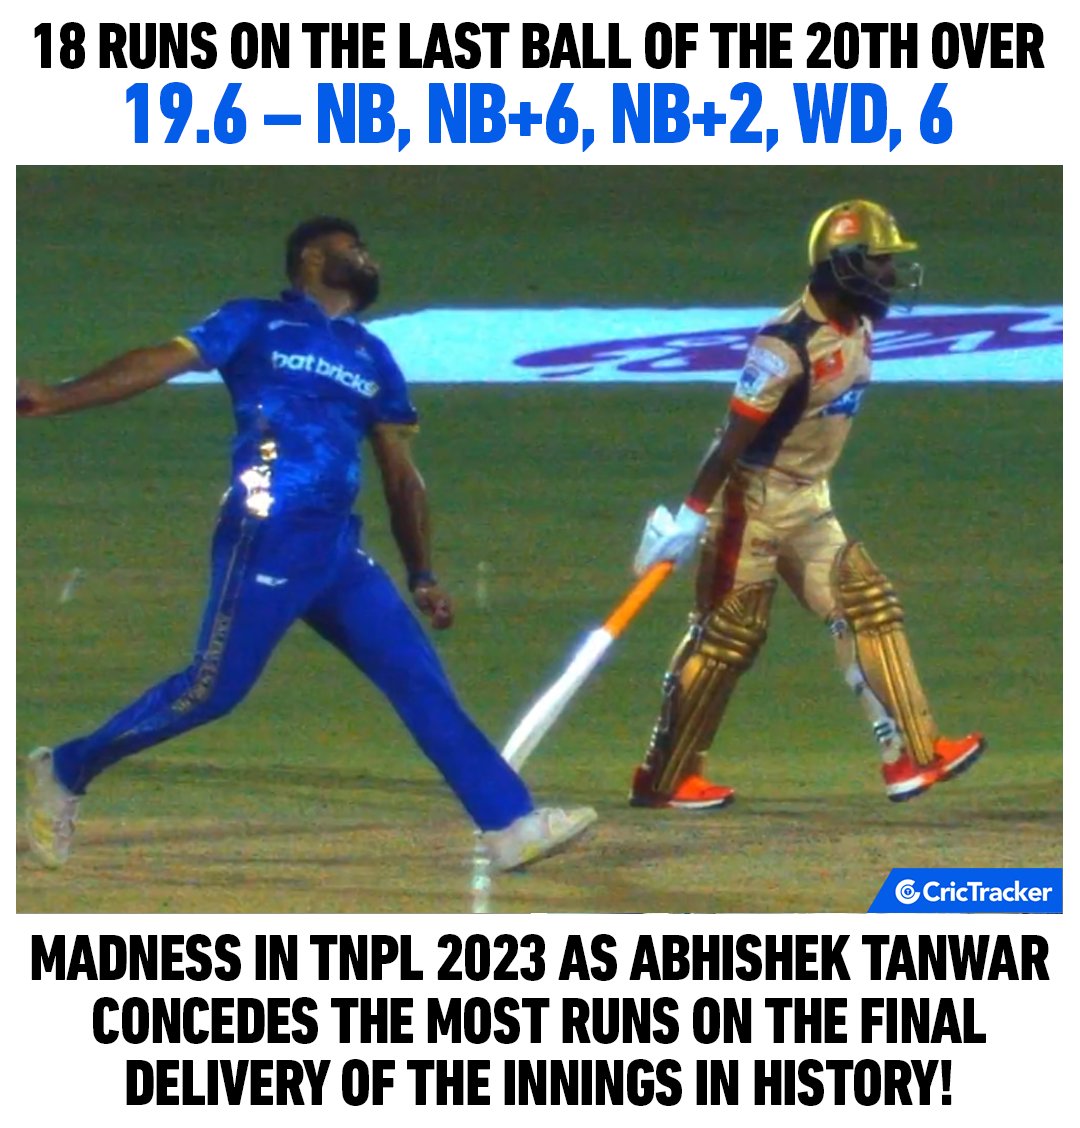 Salem Spartans bowler, Abhishek Tanwar bowls the most expensive final delivery in the history of T20 cricket.

#TNPL2023 #AbhishekTanwar